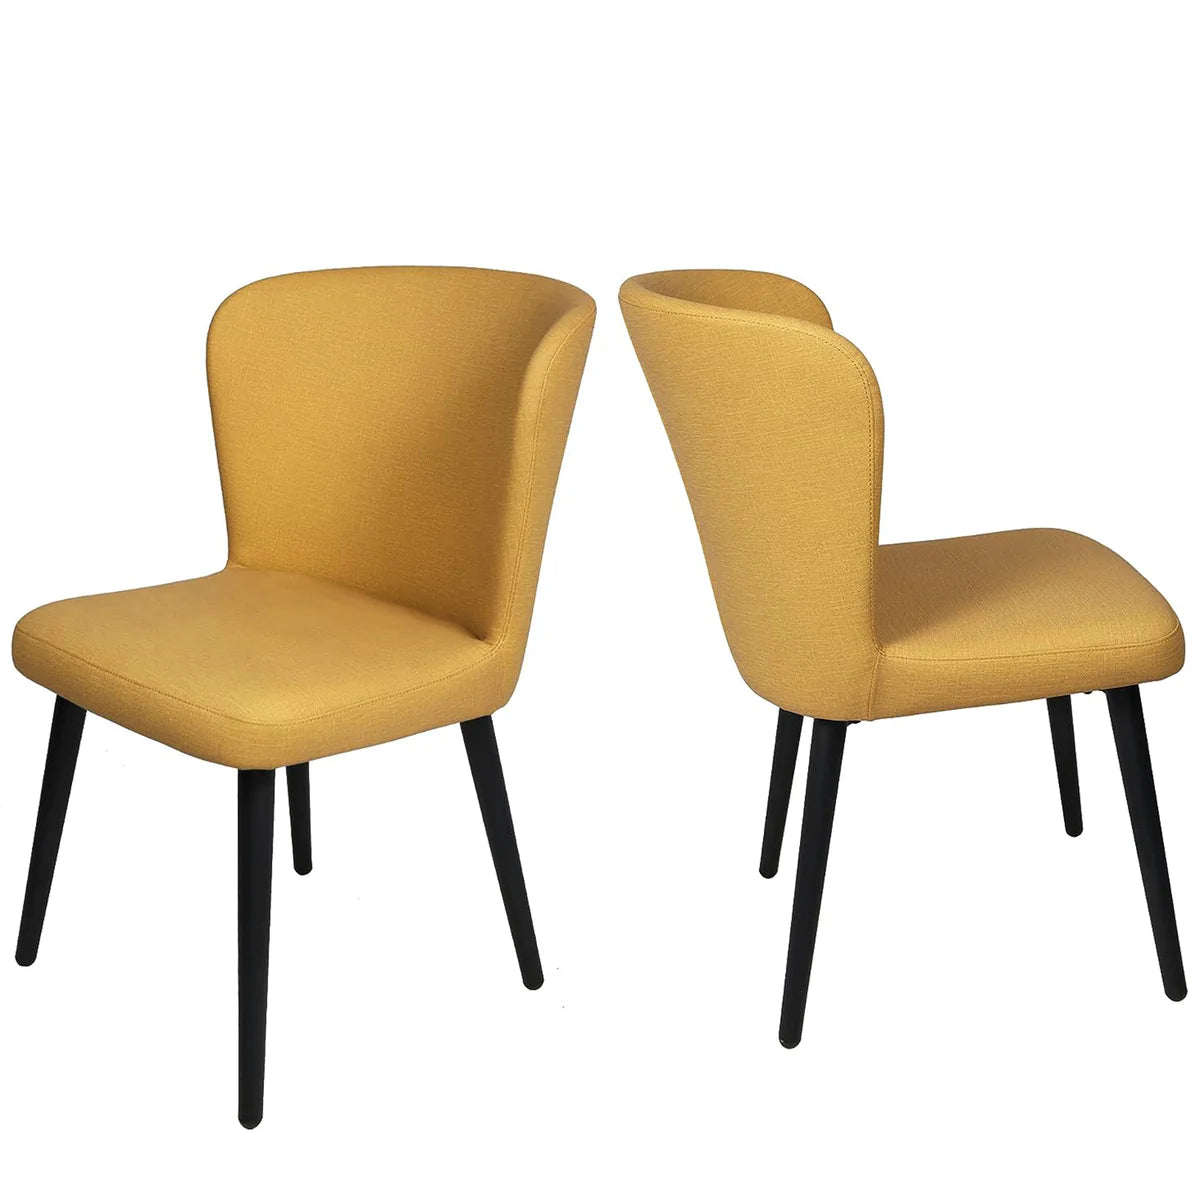 2 Set of  Dining Chairs Upholstered Side Chairs with Soft PU Leather Seat Backrest, Yellow